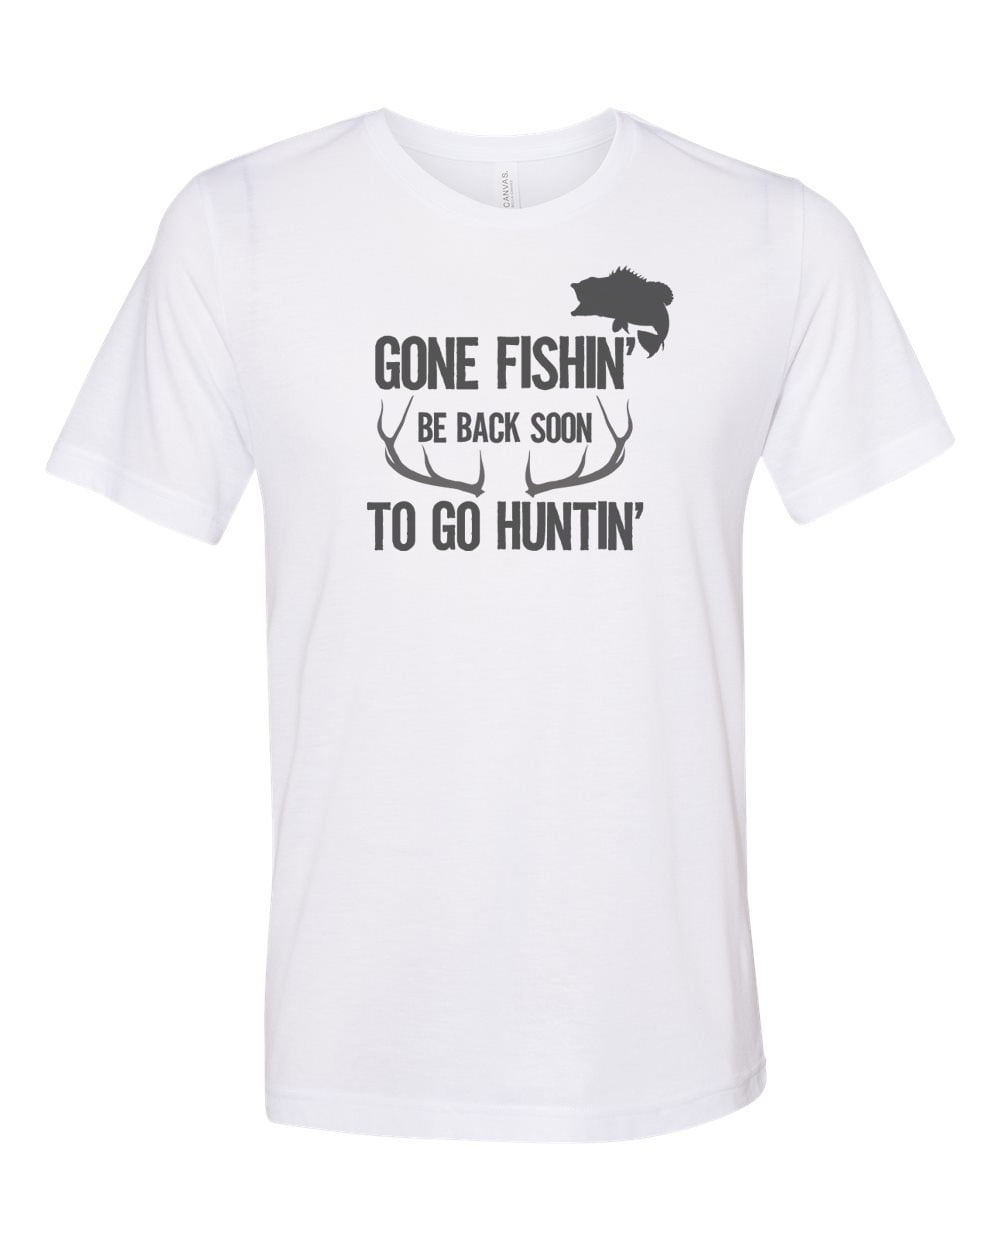 Hunting And Fishing Shirt, Gone Fishin' Be Back To Soon To Go Huntin',  Sublimation Tee, Fishing Shirt, Hunting Shirt, Dad Tee, Father's Day,  White